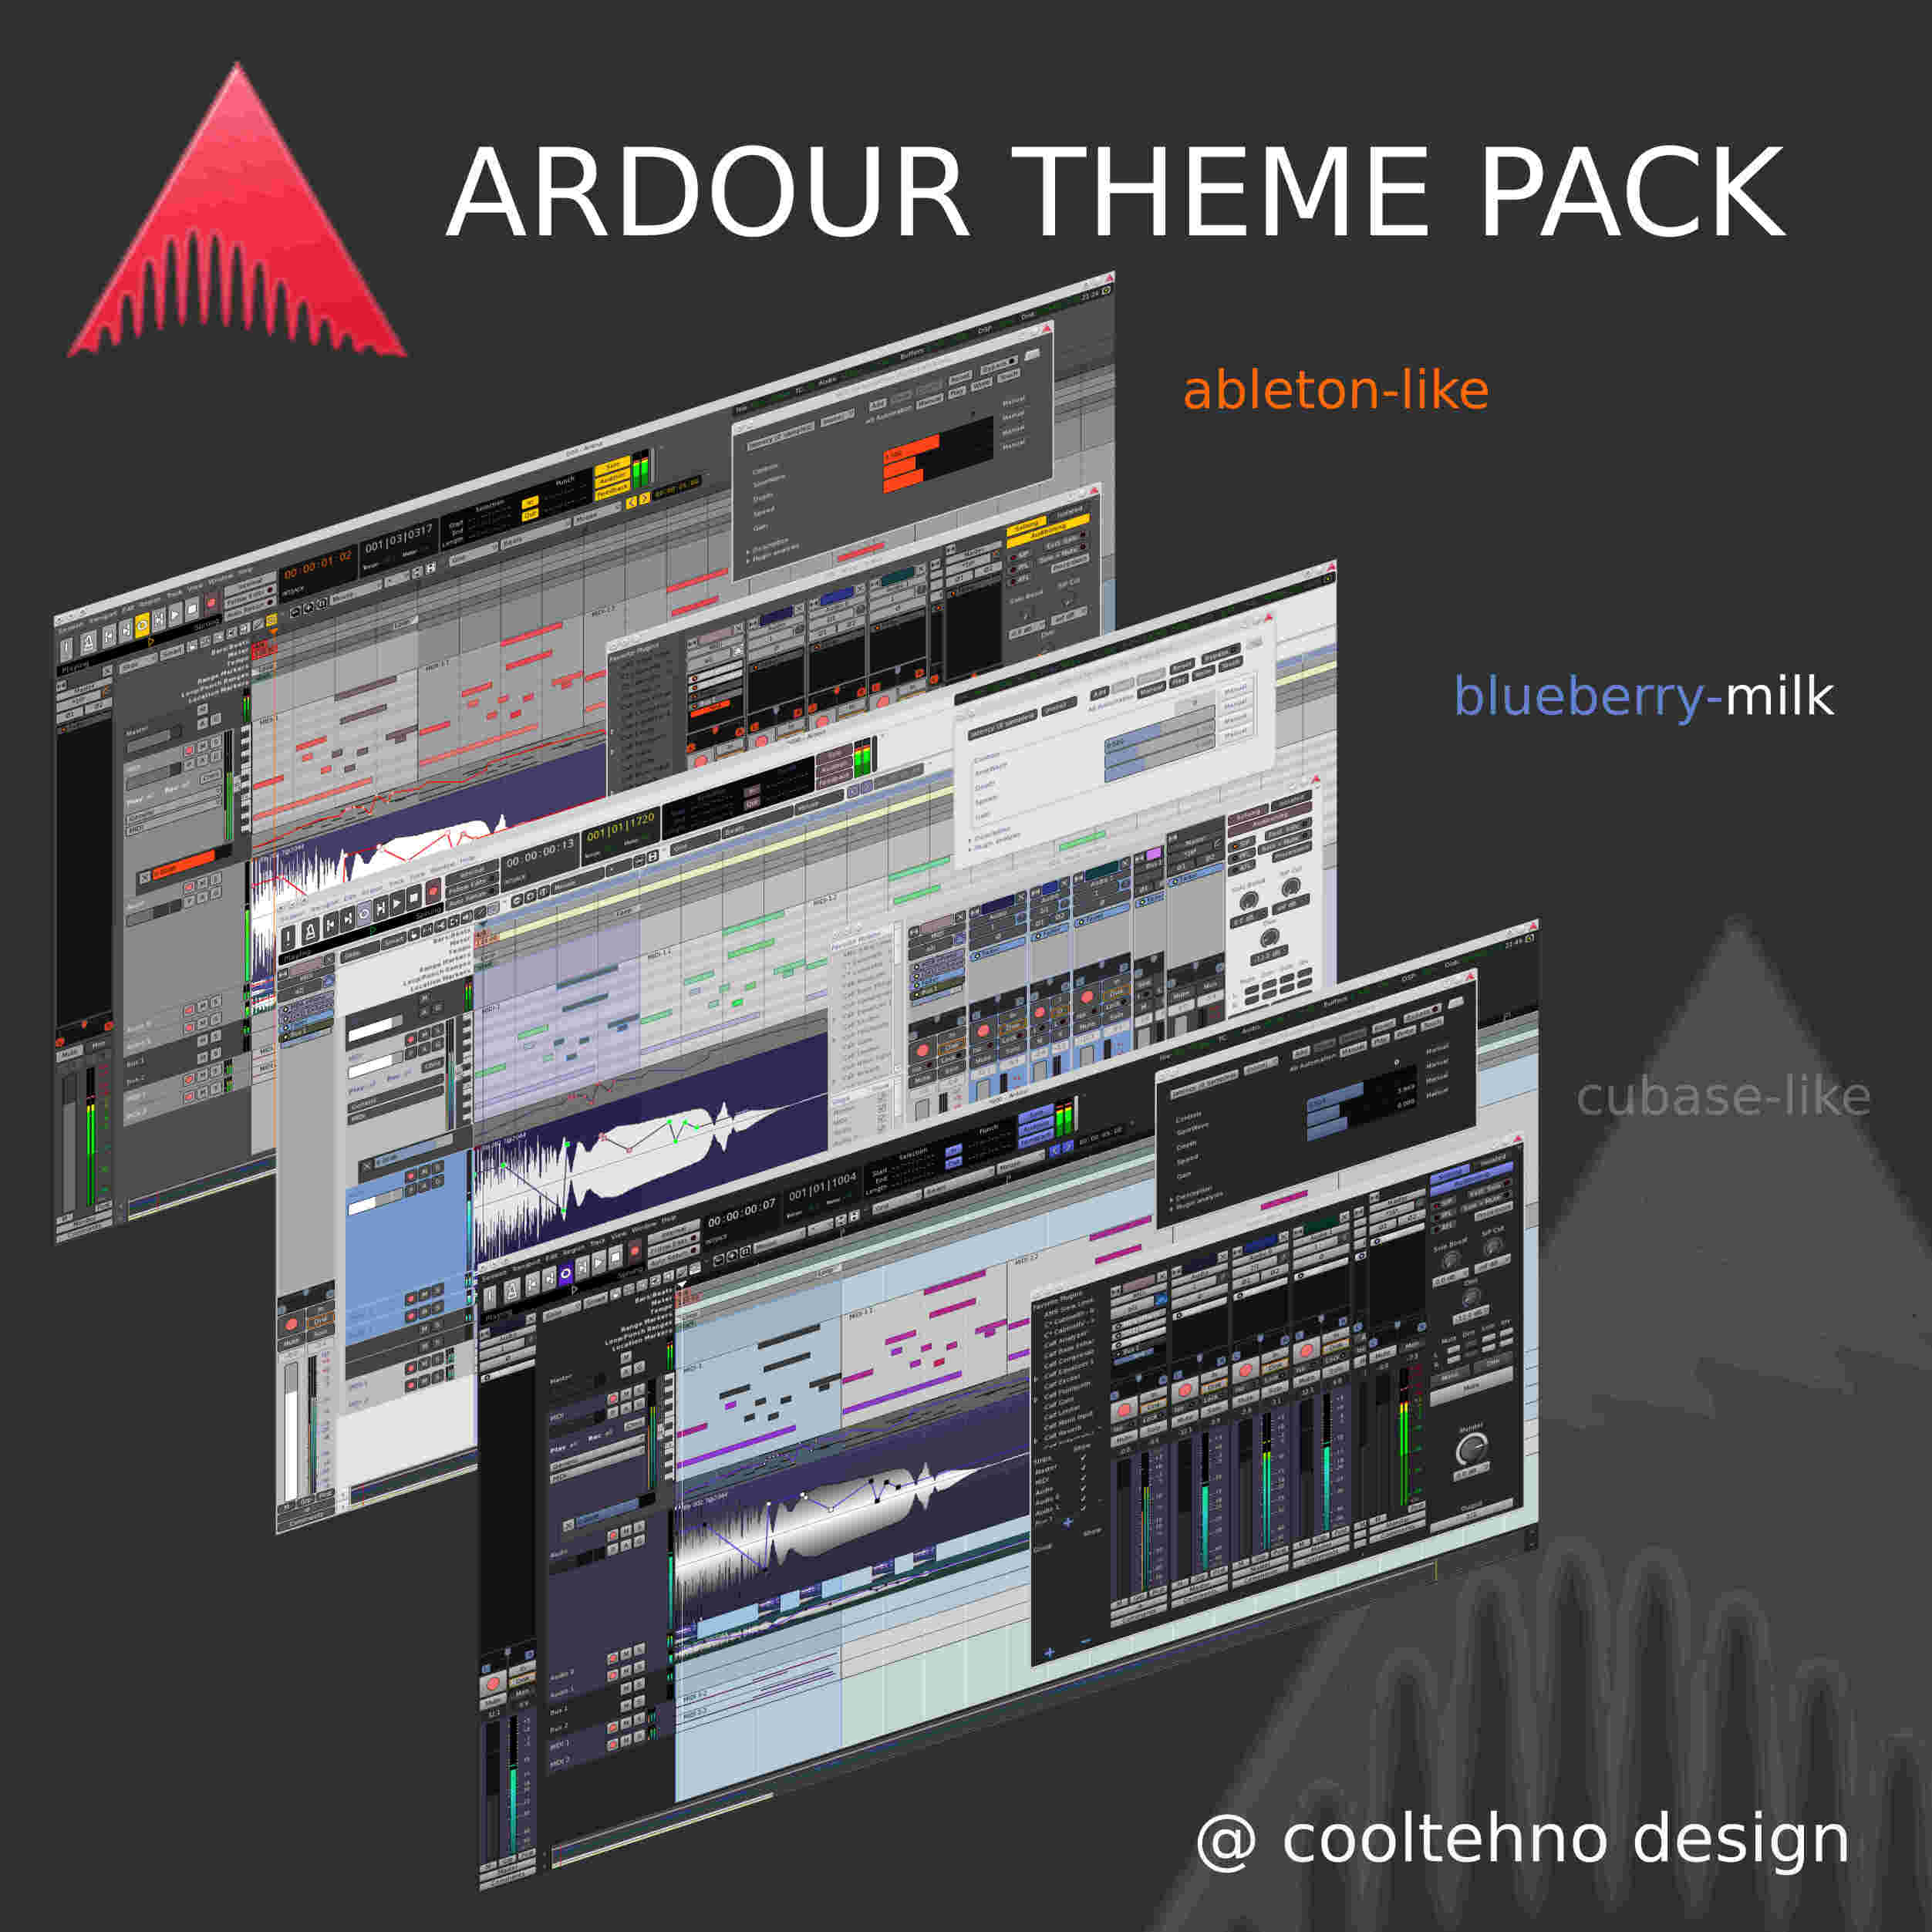 three different themes for ardour